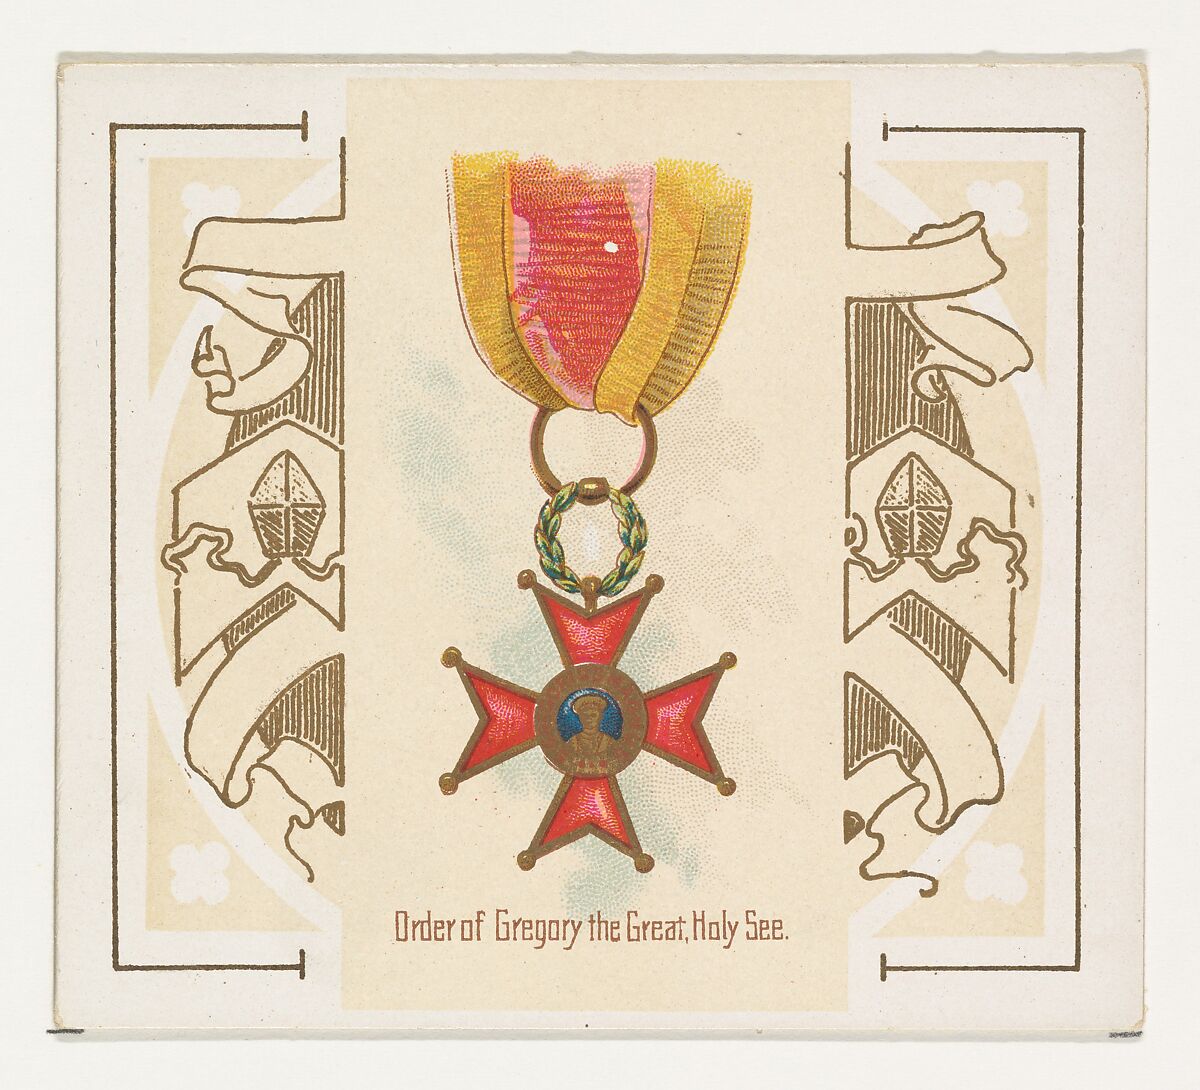 Order of Gregory the Great, Holy See, from the World's Decorations series (N44) for Allen & Ginter Cigarettes, Issued by Allen &amp; Ginter (American, Richmond, Virginia), Commercial color lithograph 